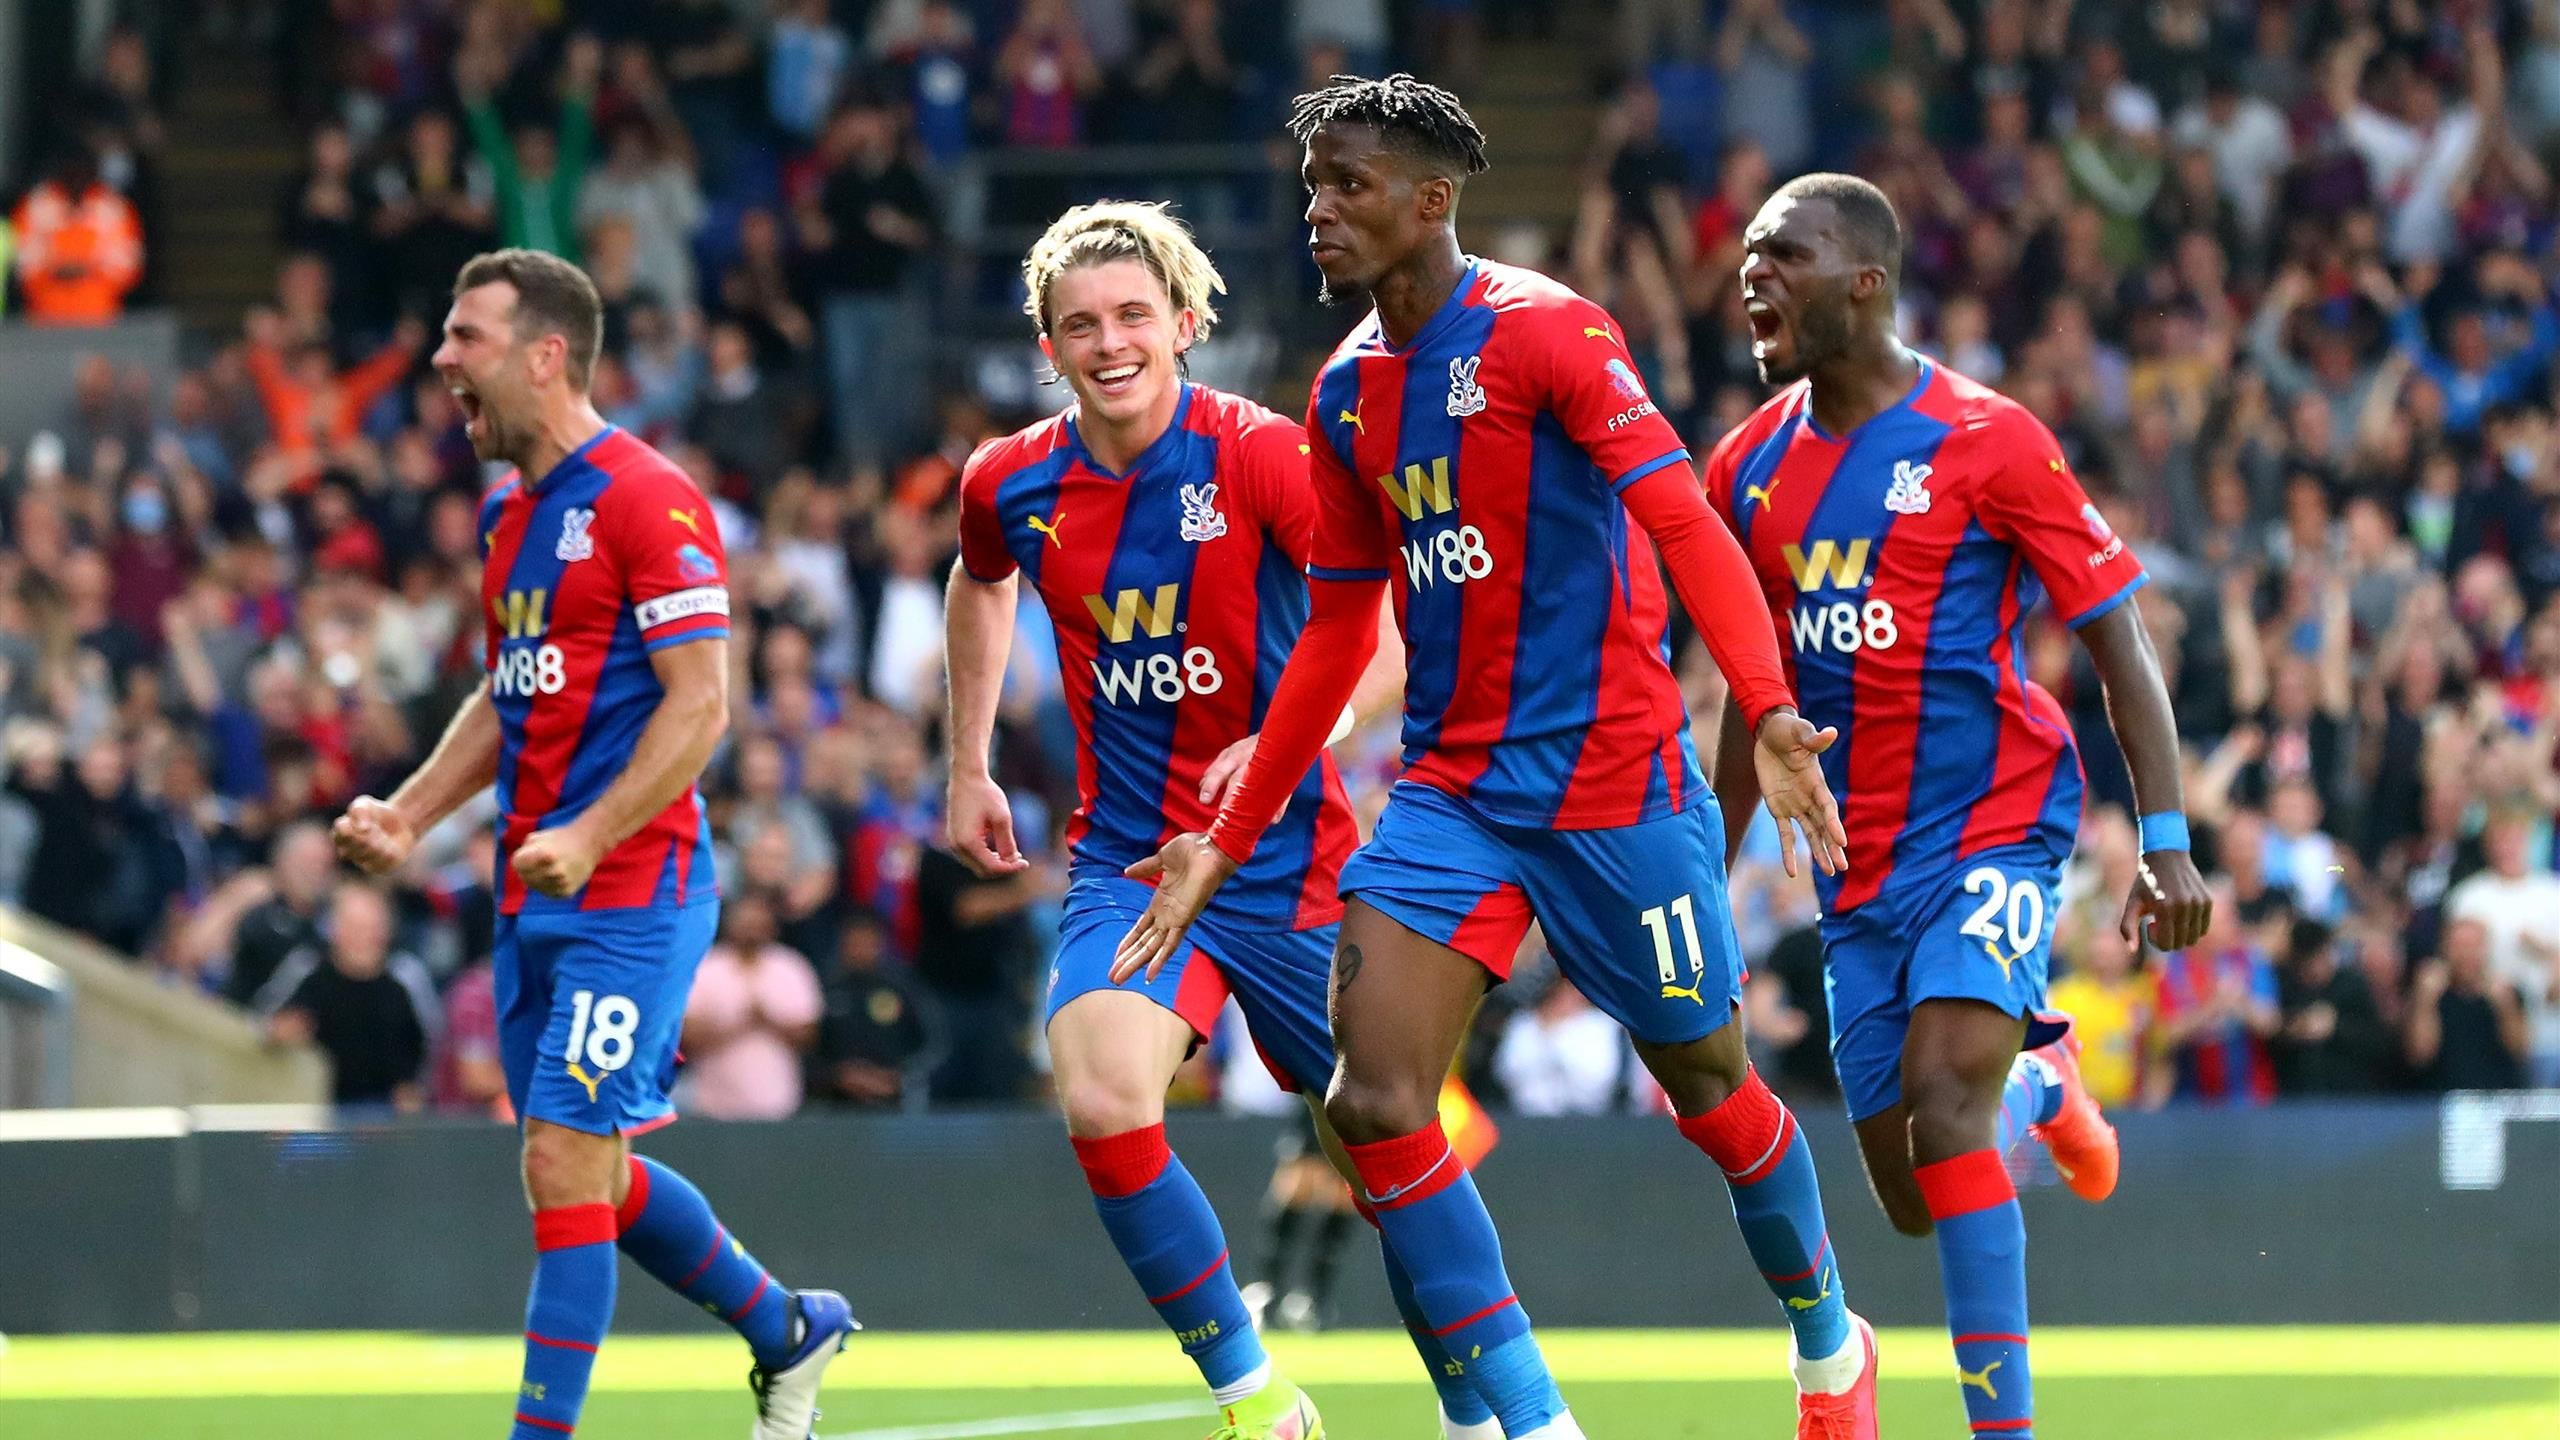 Premier League: Crystal Palace pen new long-term partnership with Macron to replace Puma as official kit partner